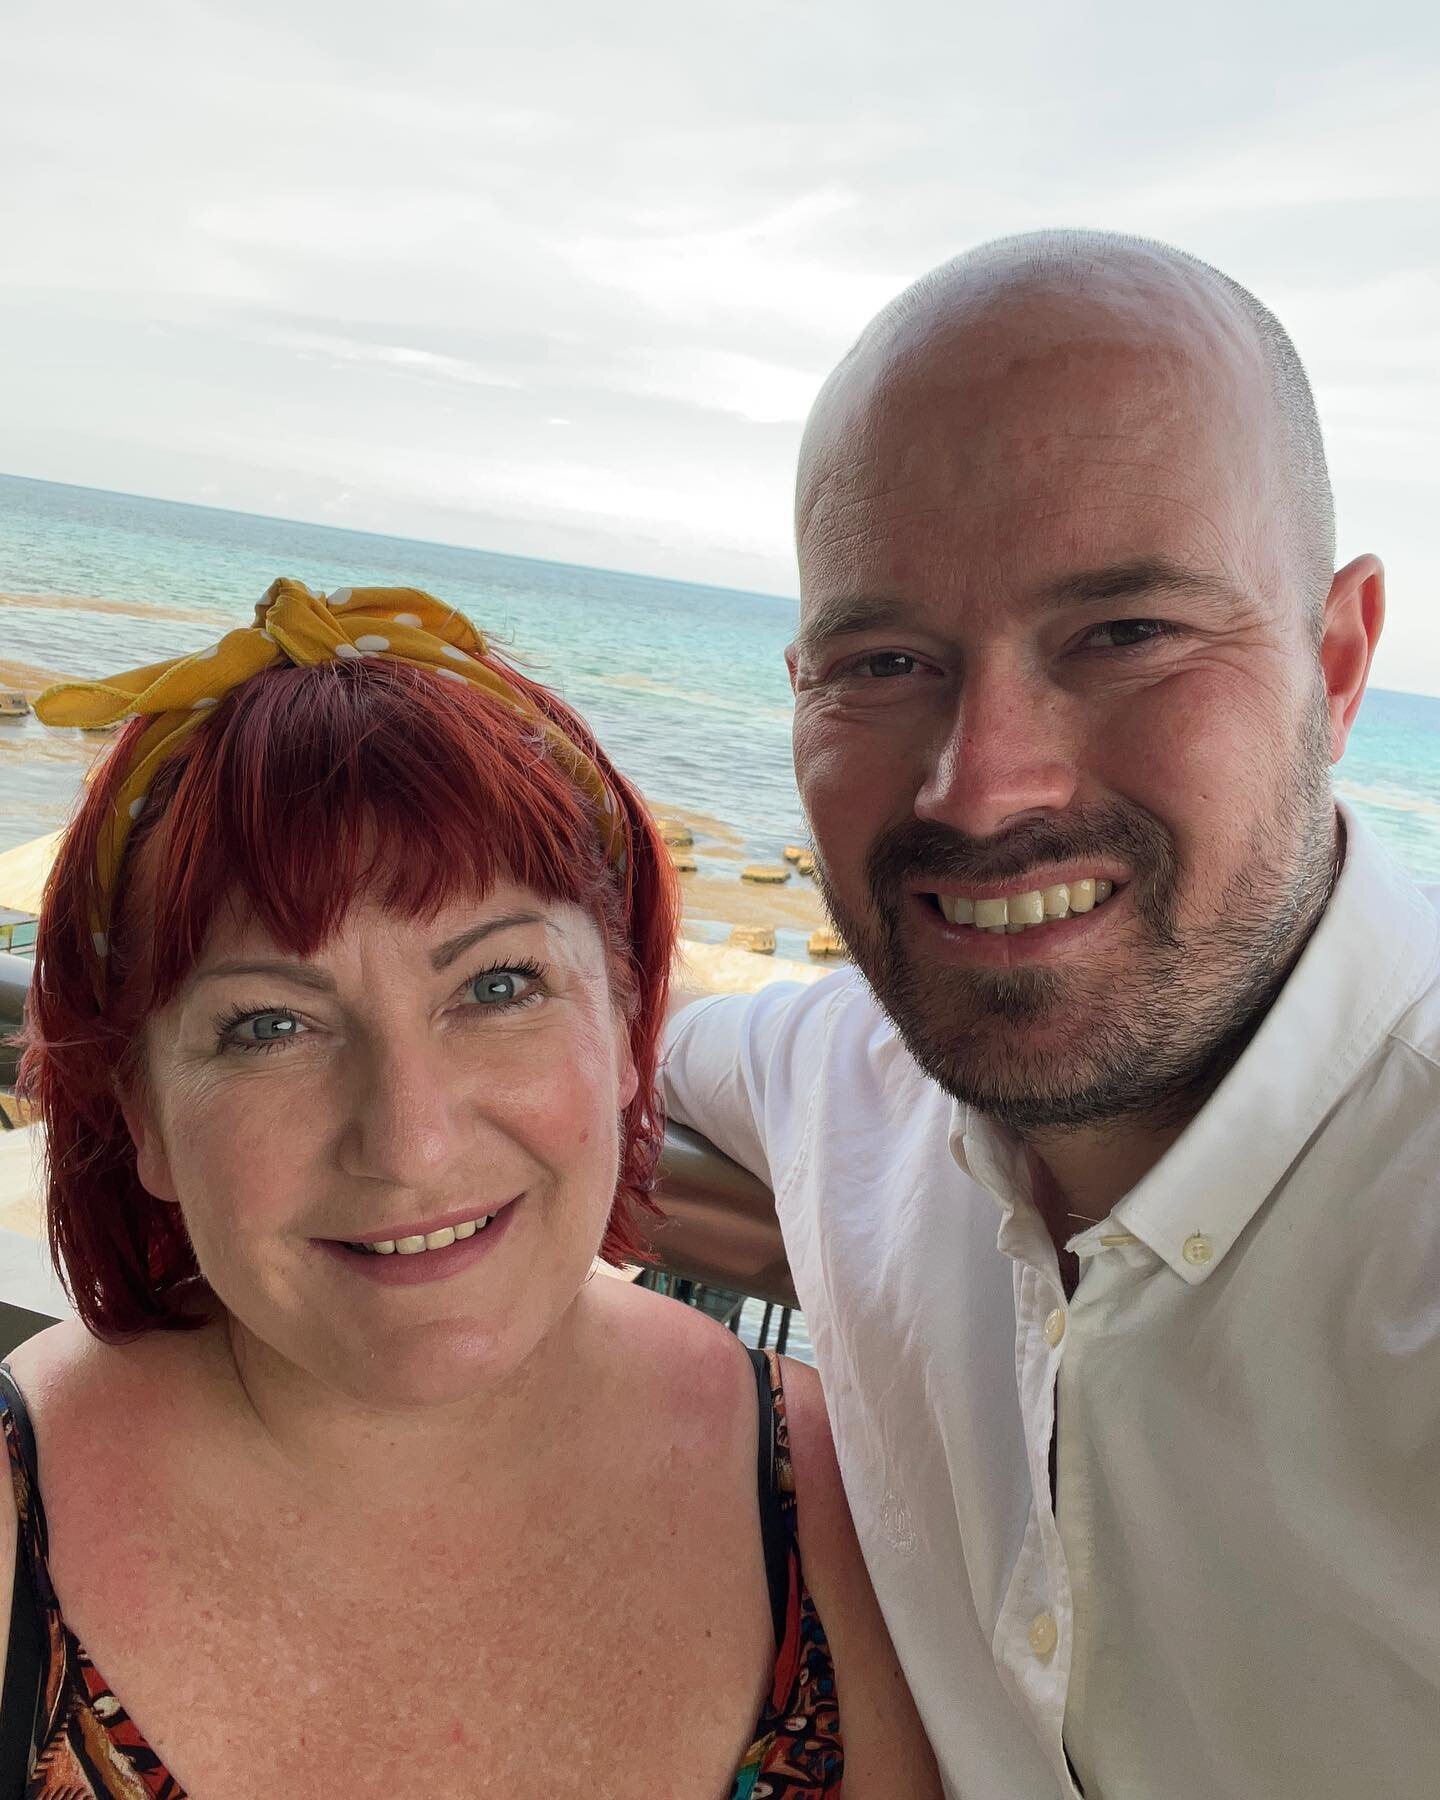 Choose the life you want and make it happen with an online business 🙌🏼

Over 17 years I&rsquo;ve been with this guy and we&rsquo;ve eventually been able to celebrate our belated 10th wedding anniversary back to the place we were married in Mexico (